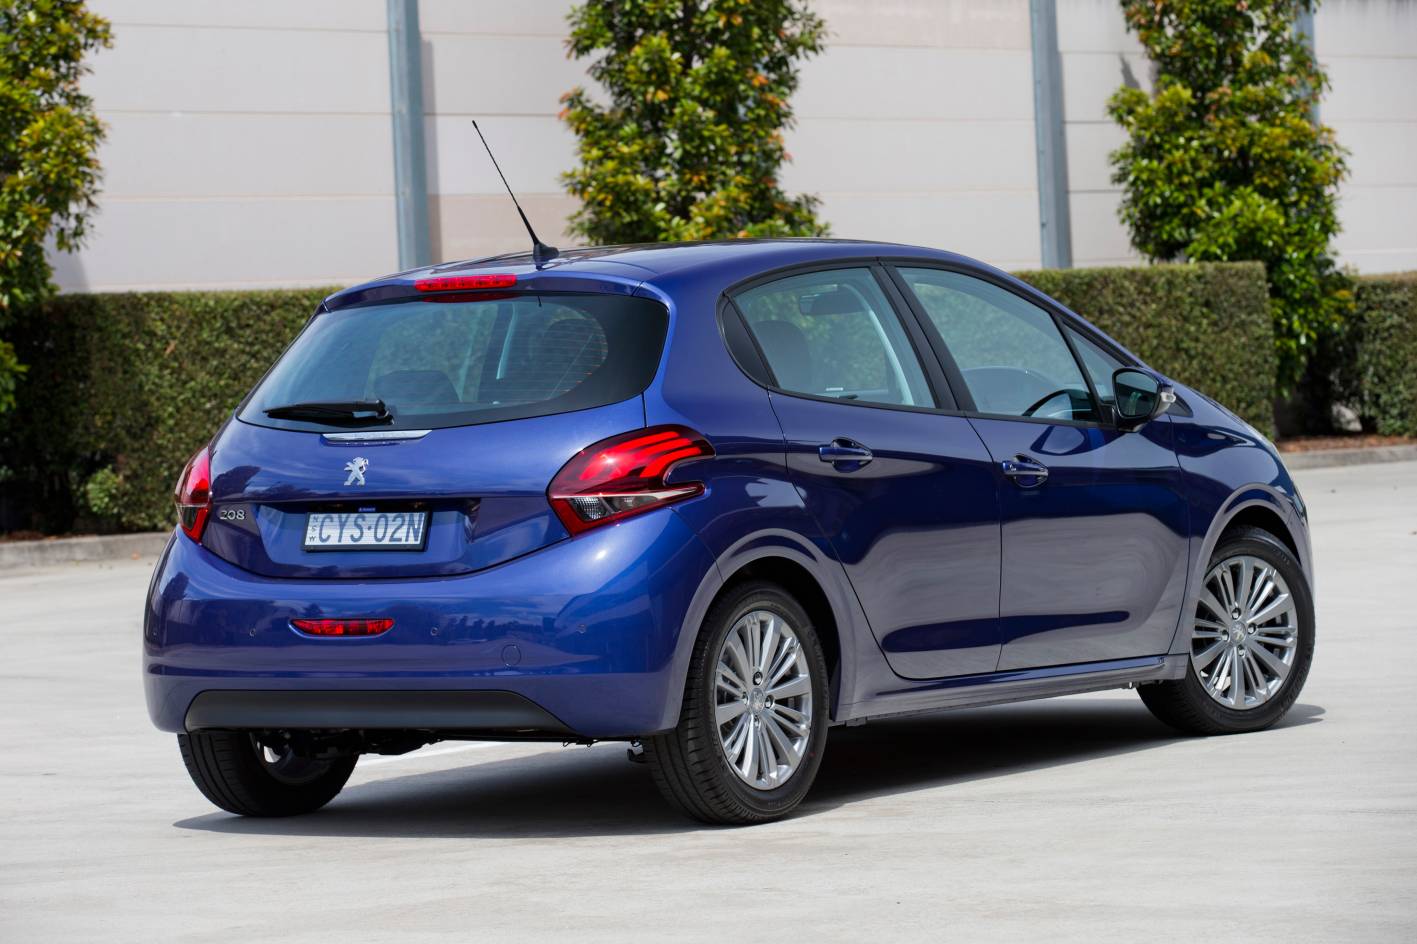 Peugeot Cars News 2015 Peugeot 208 pricing and